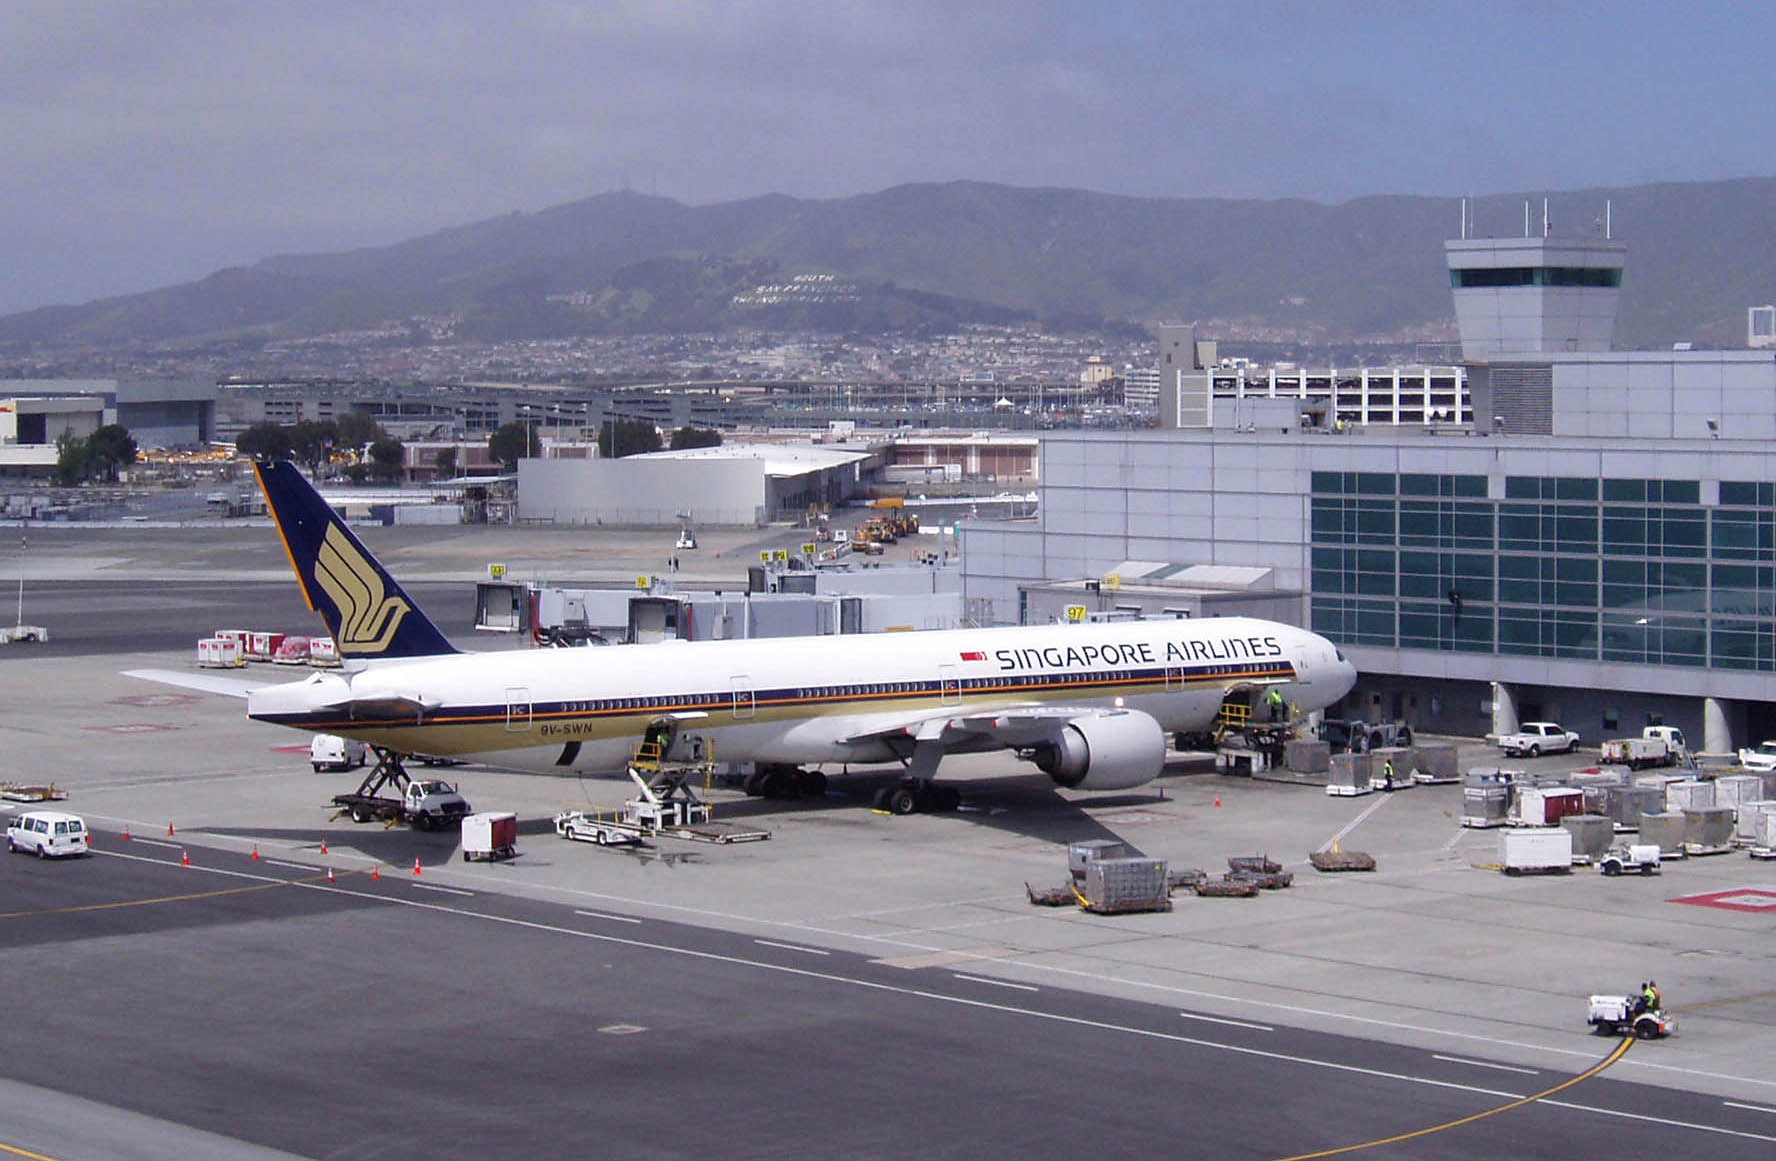 File:San Francisco Airport view (5604812245).jpg - Wikimedia Commons